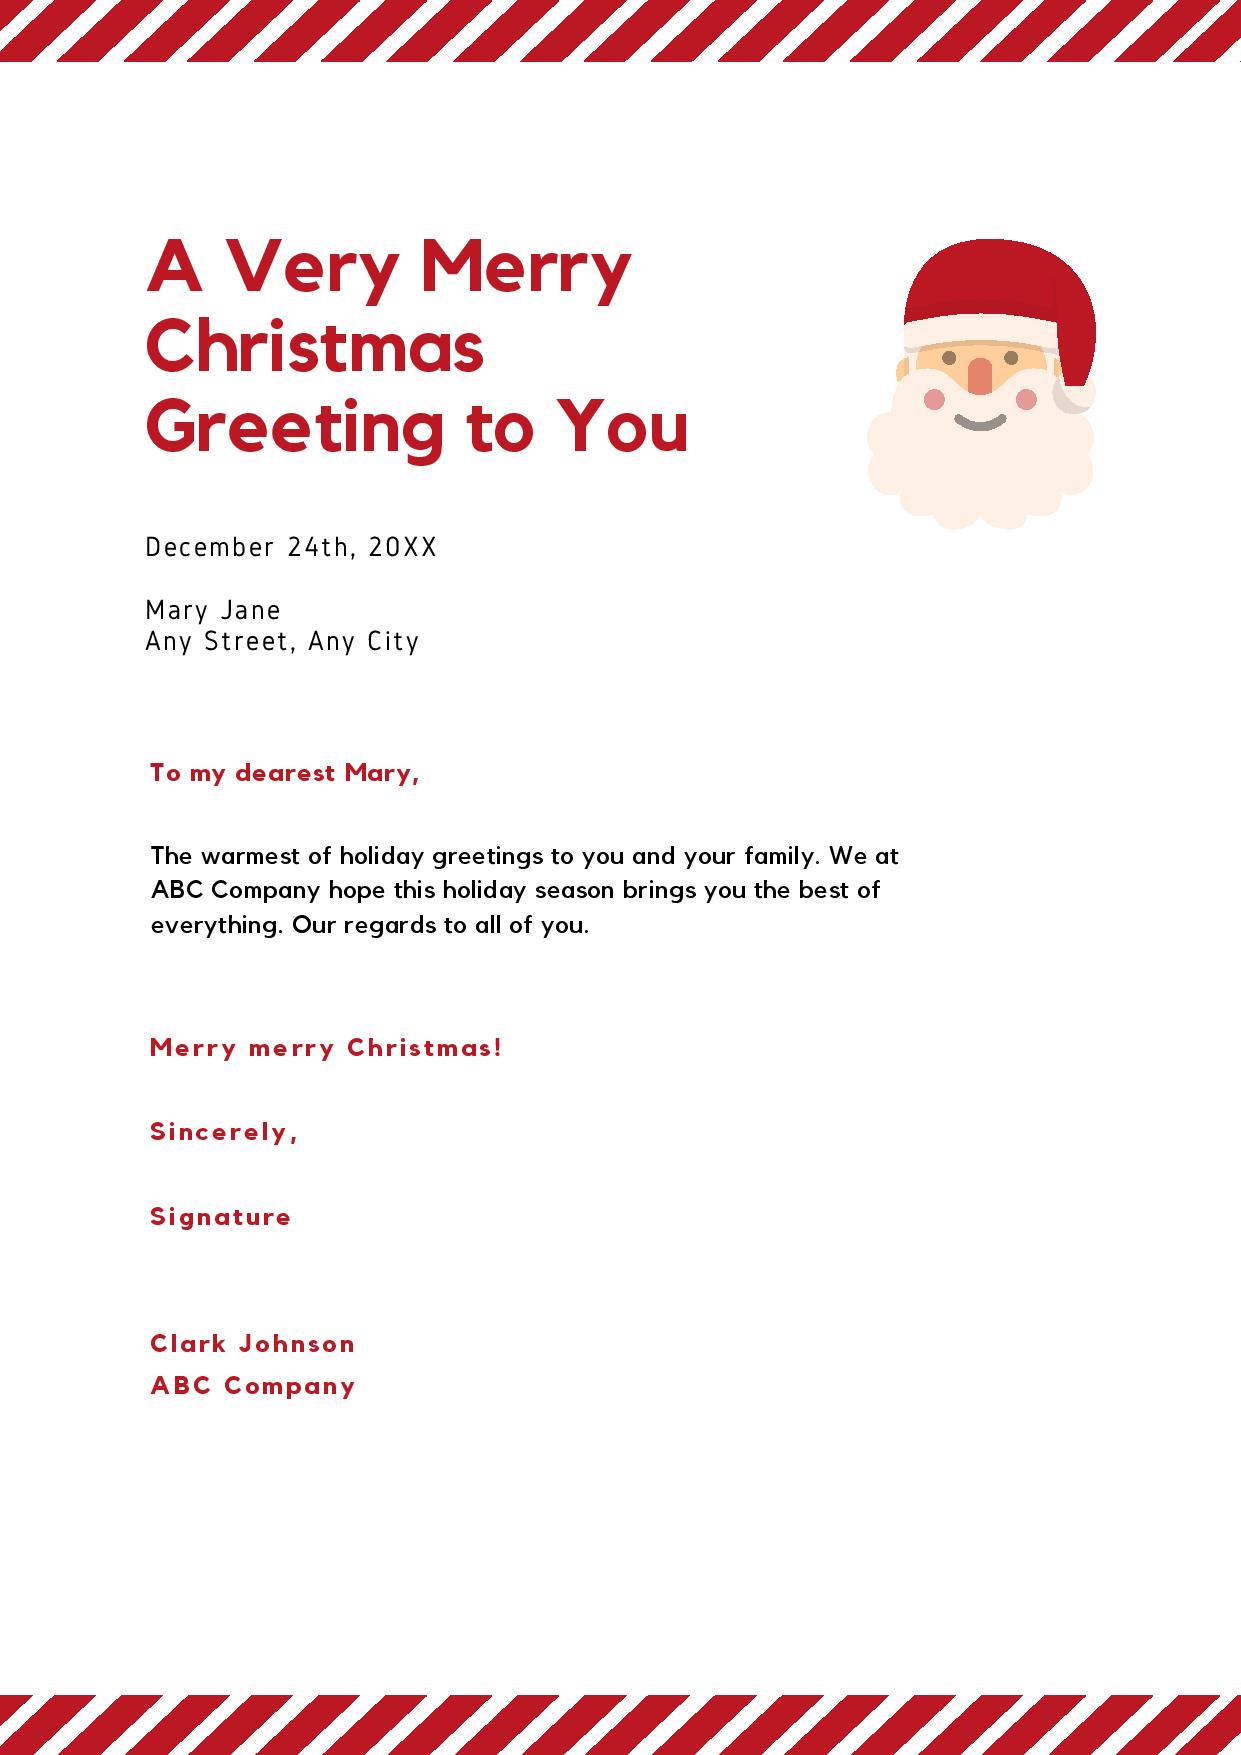 This short letter wishes an employee or business associate holiday greetings. This is particularly useful for those employees or business associates whose religion is not covered by the standard business greeting cards